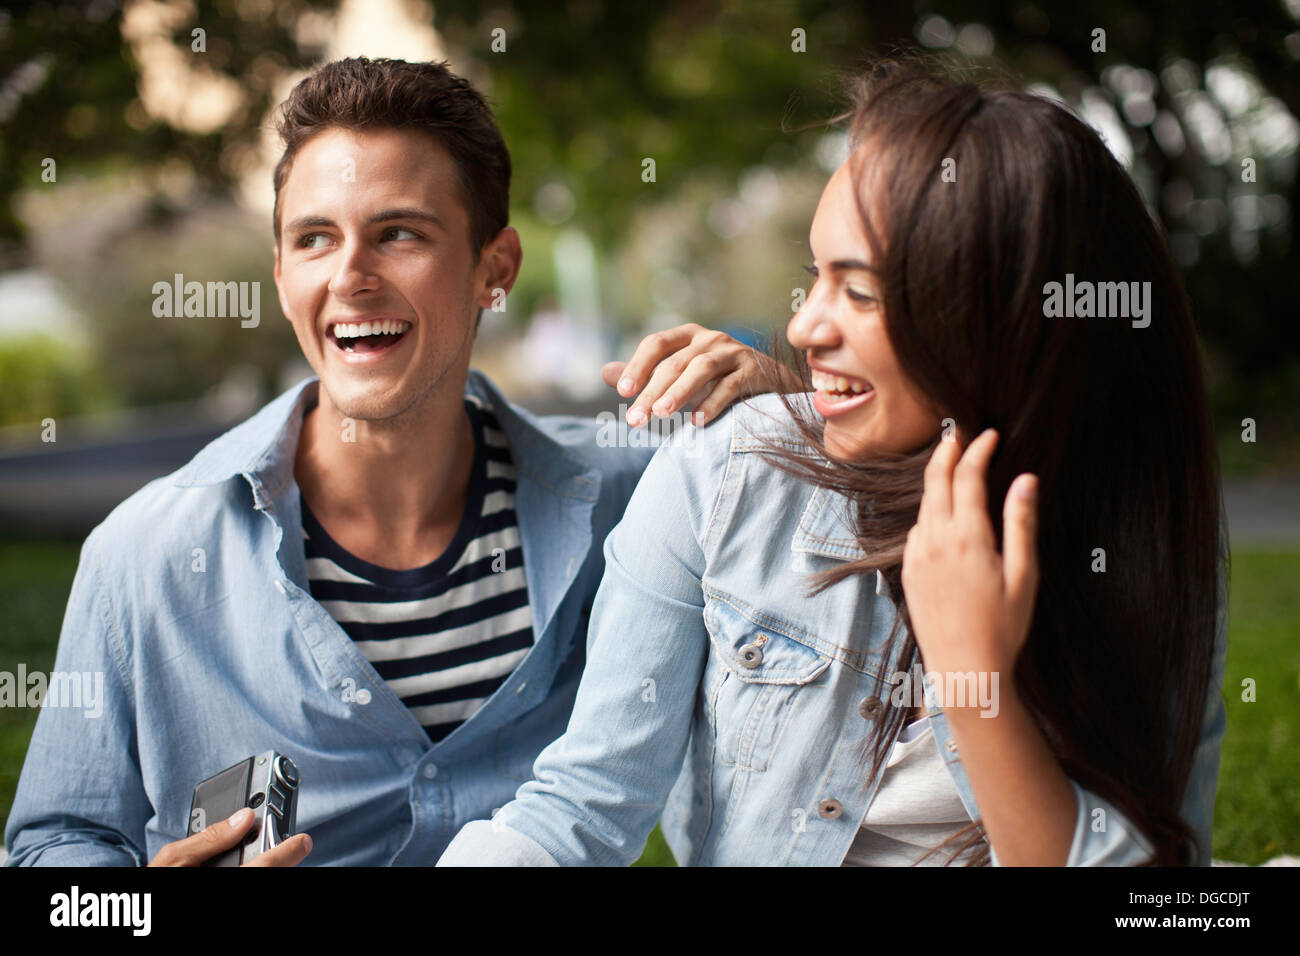 Young couple laughing together Stock Photo